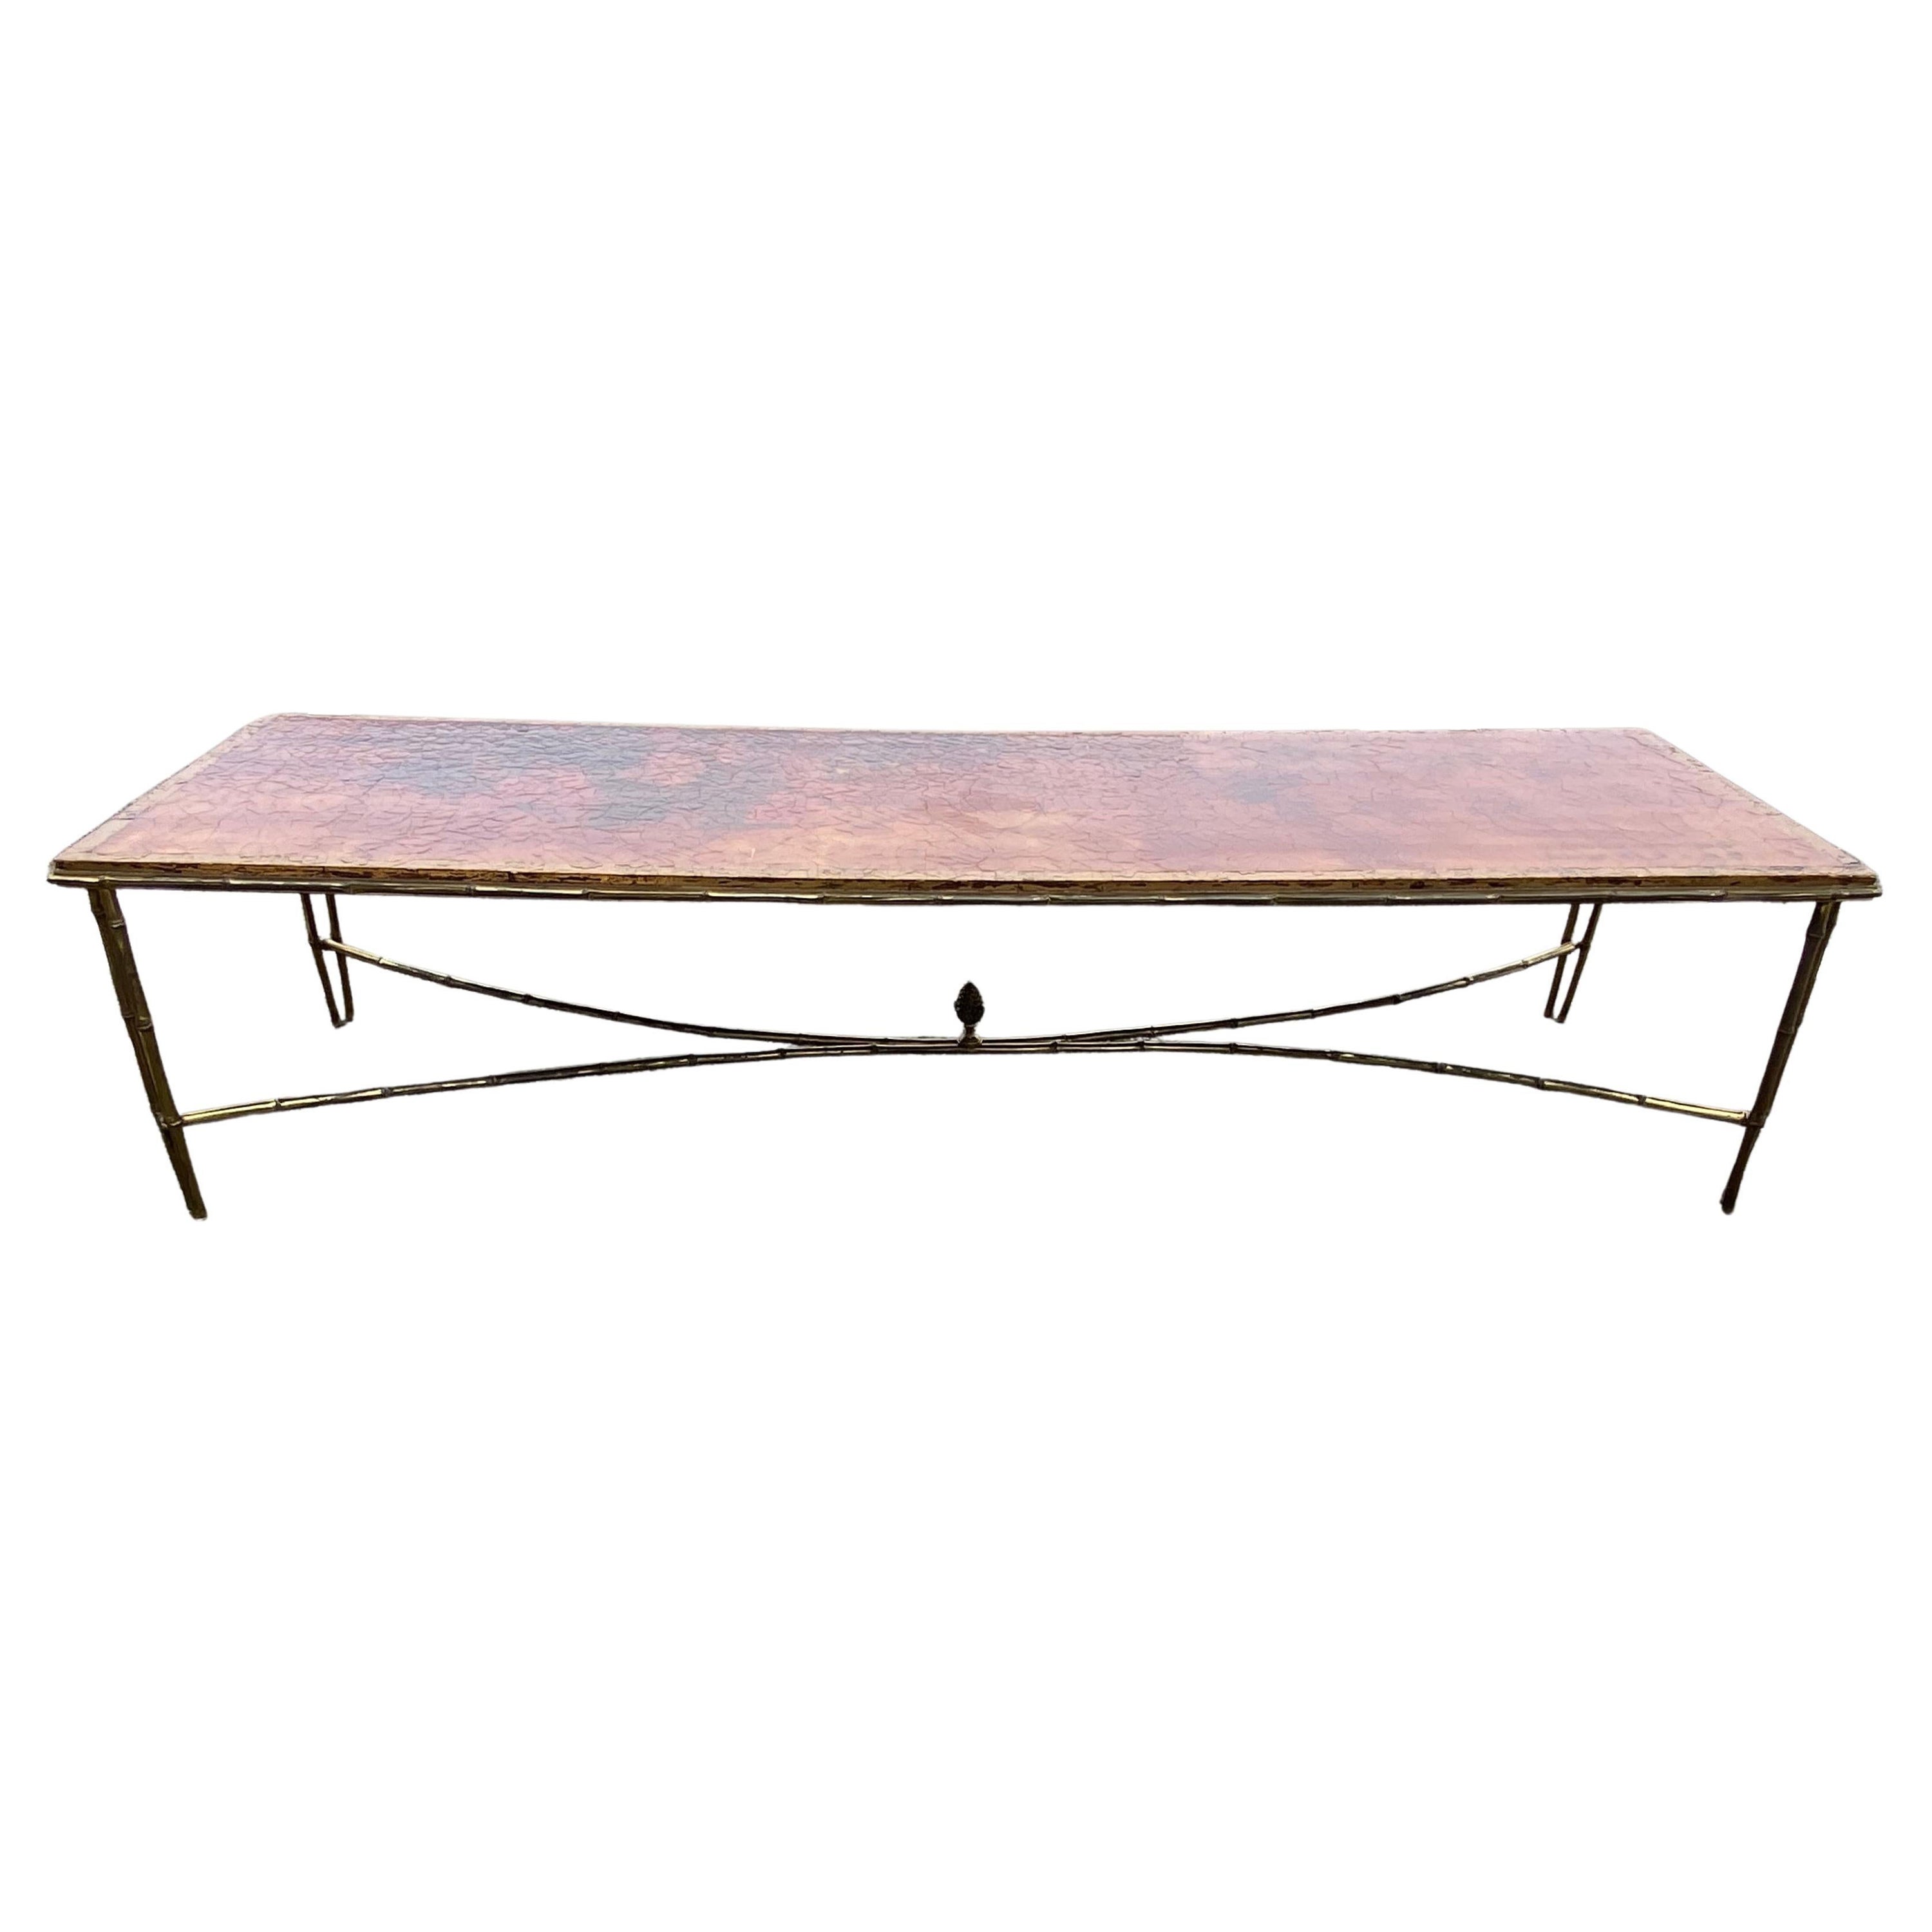 1970 ‘Coffee Table Bronze Bamboo Model Maison Baguès Chinese Lacquer 168 X 65 cm For Sale